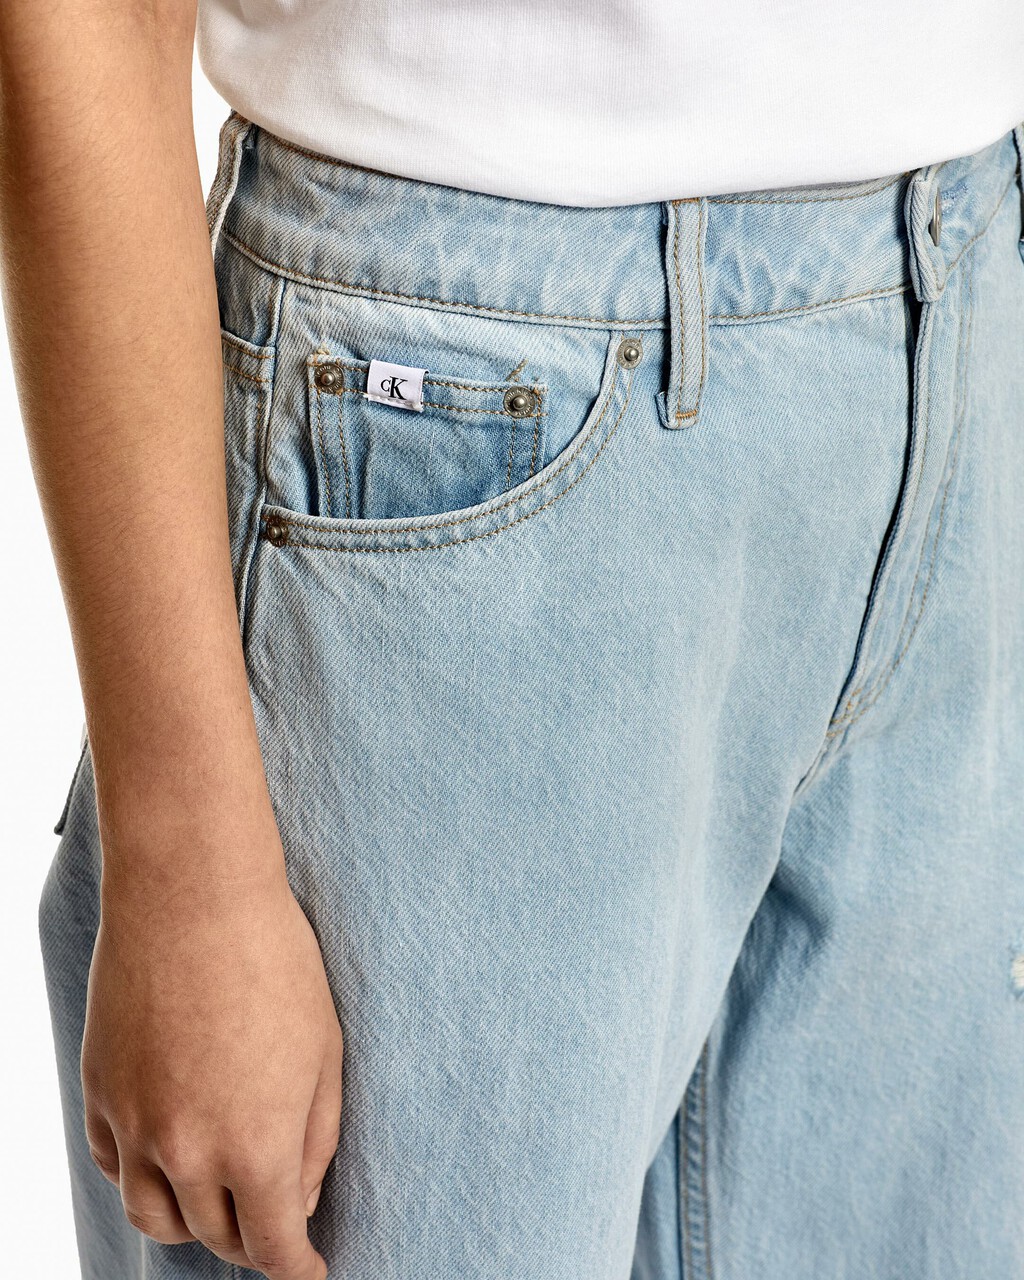 90S STRAIGHT RECONSIDERED JEANS, Bleached Blue, hi-res